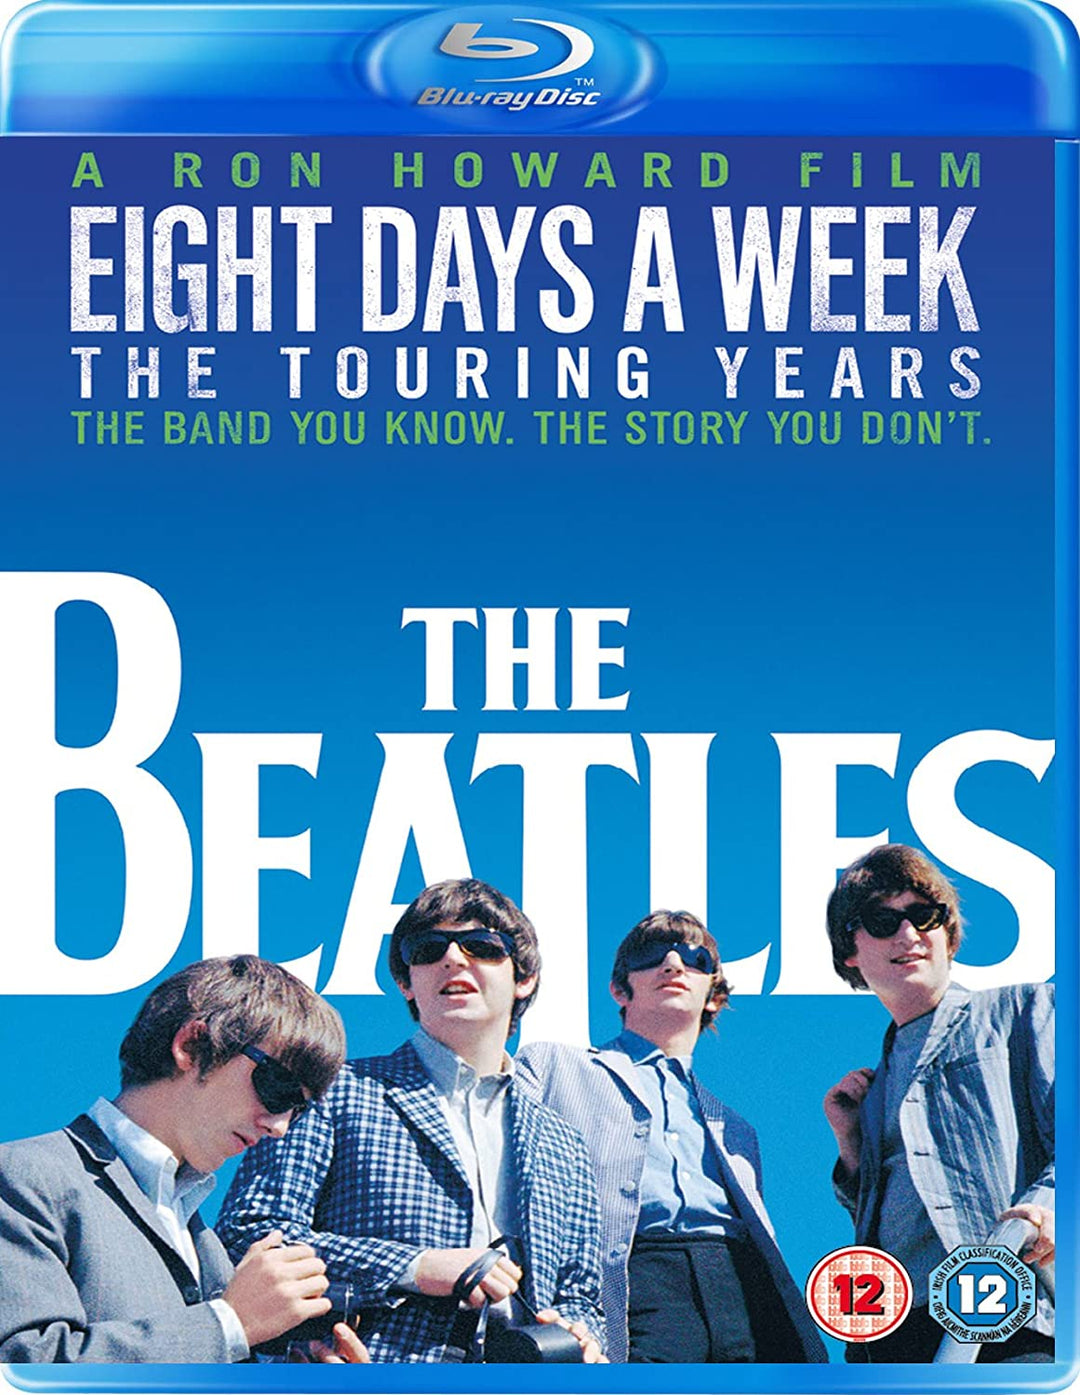 The Beatles: Acht Tage die Woche - The Touring Years [Blu-ray] [2016]